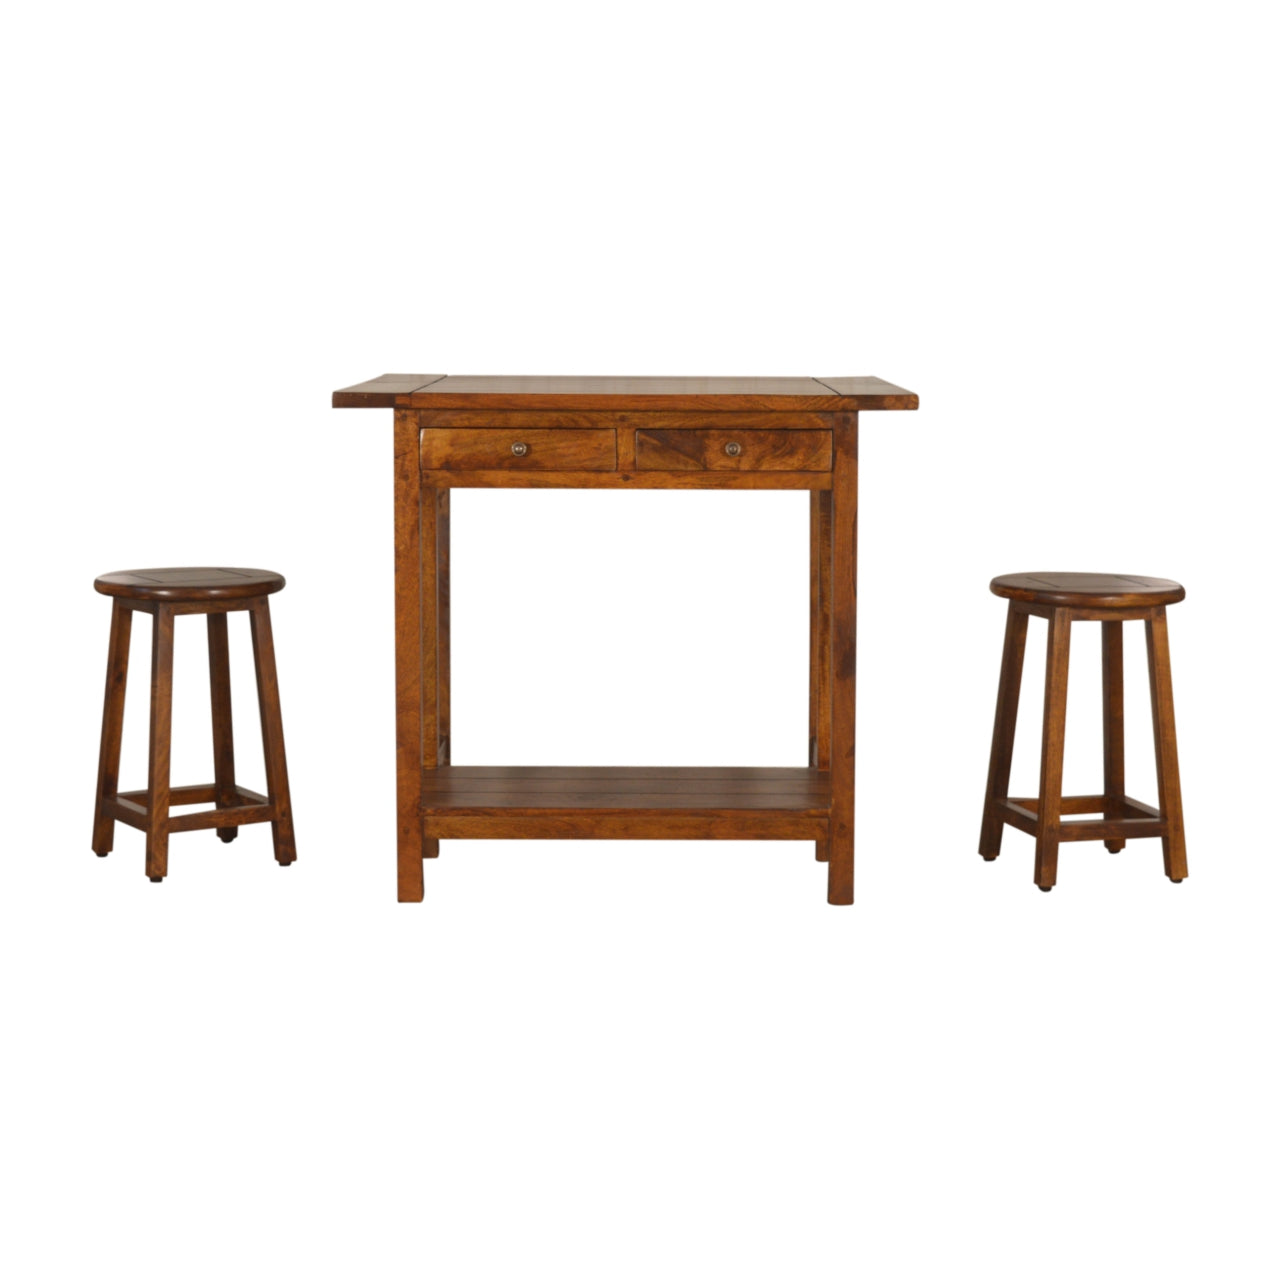 Fold & Pack Away Chestnut Breakfast Table With 2 Stools - mancavesuperstore